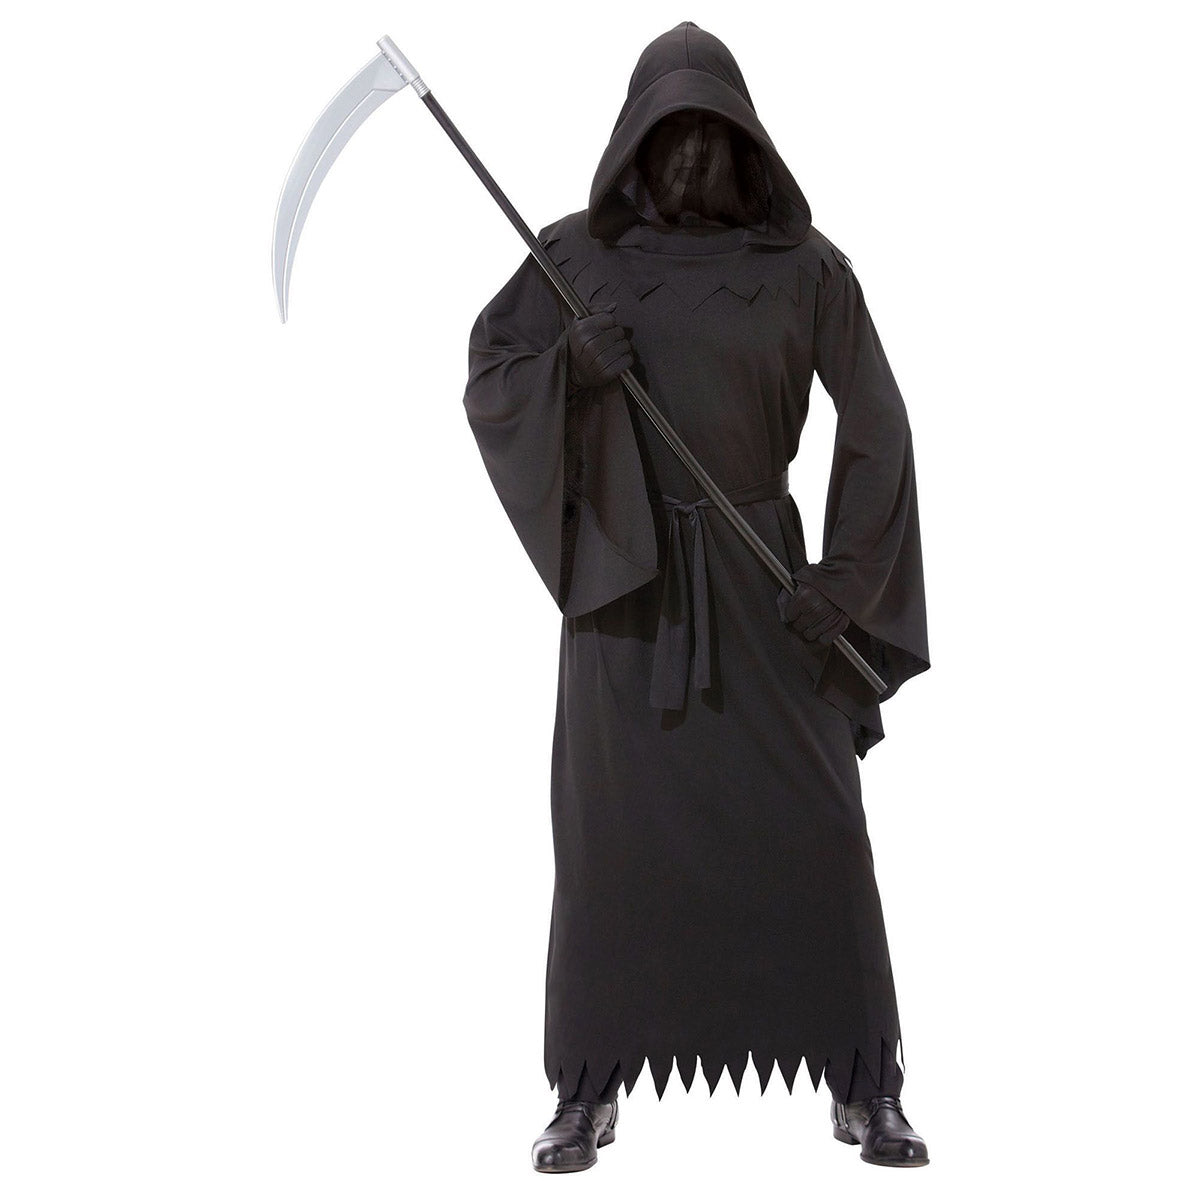 SUIT YOURSELF COSTUME CO. Costumes Phantom of Darkness Reaper Costume for Adults, Black Robe with Attached Mask 809801707923